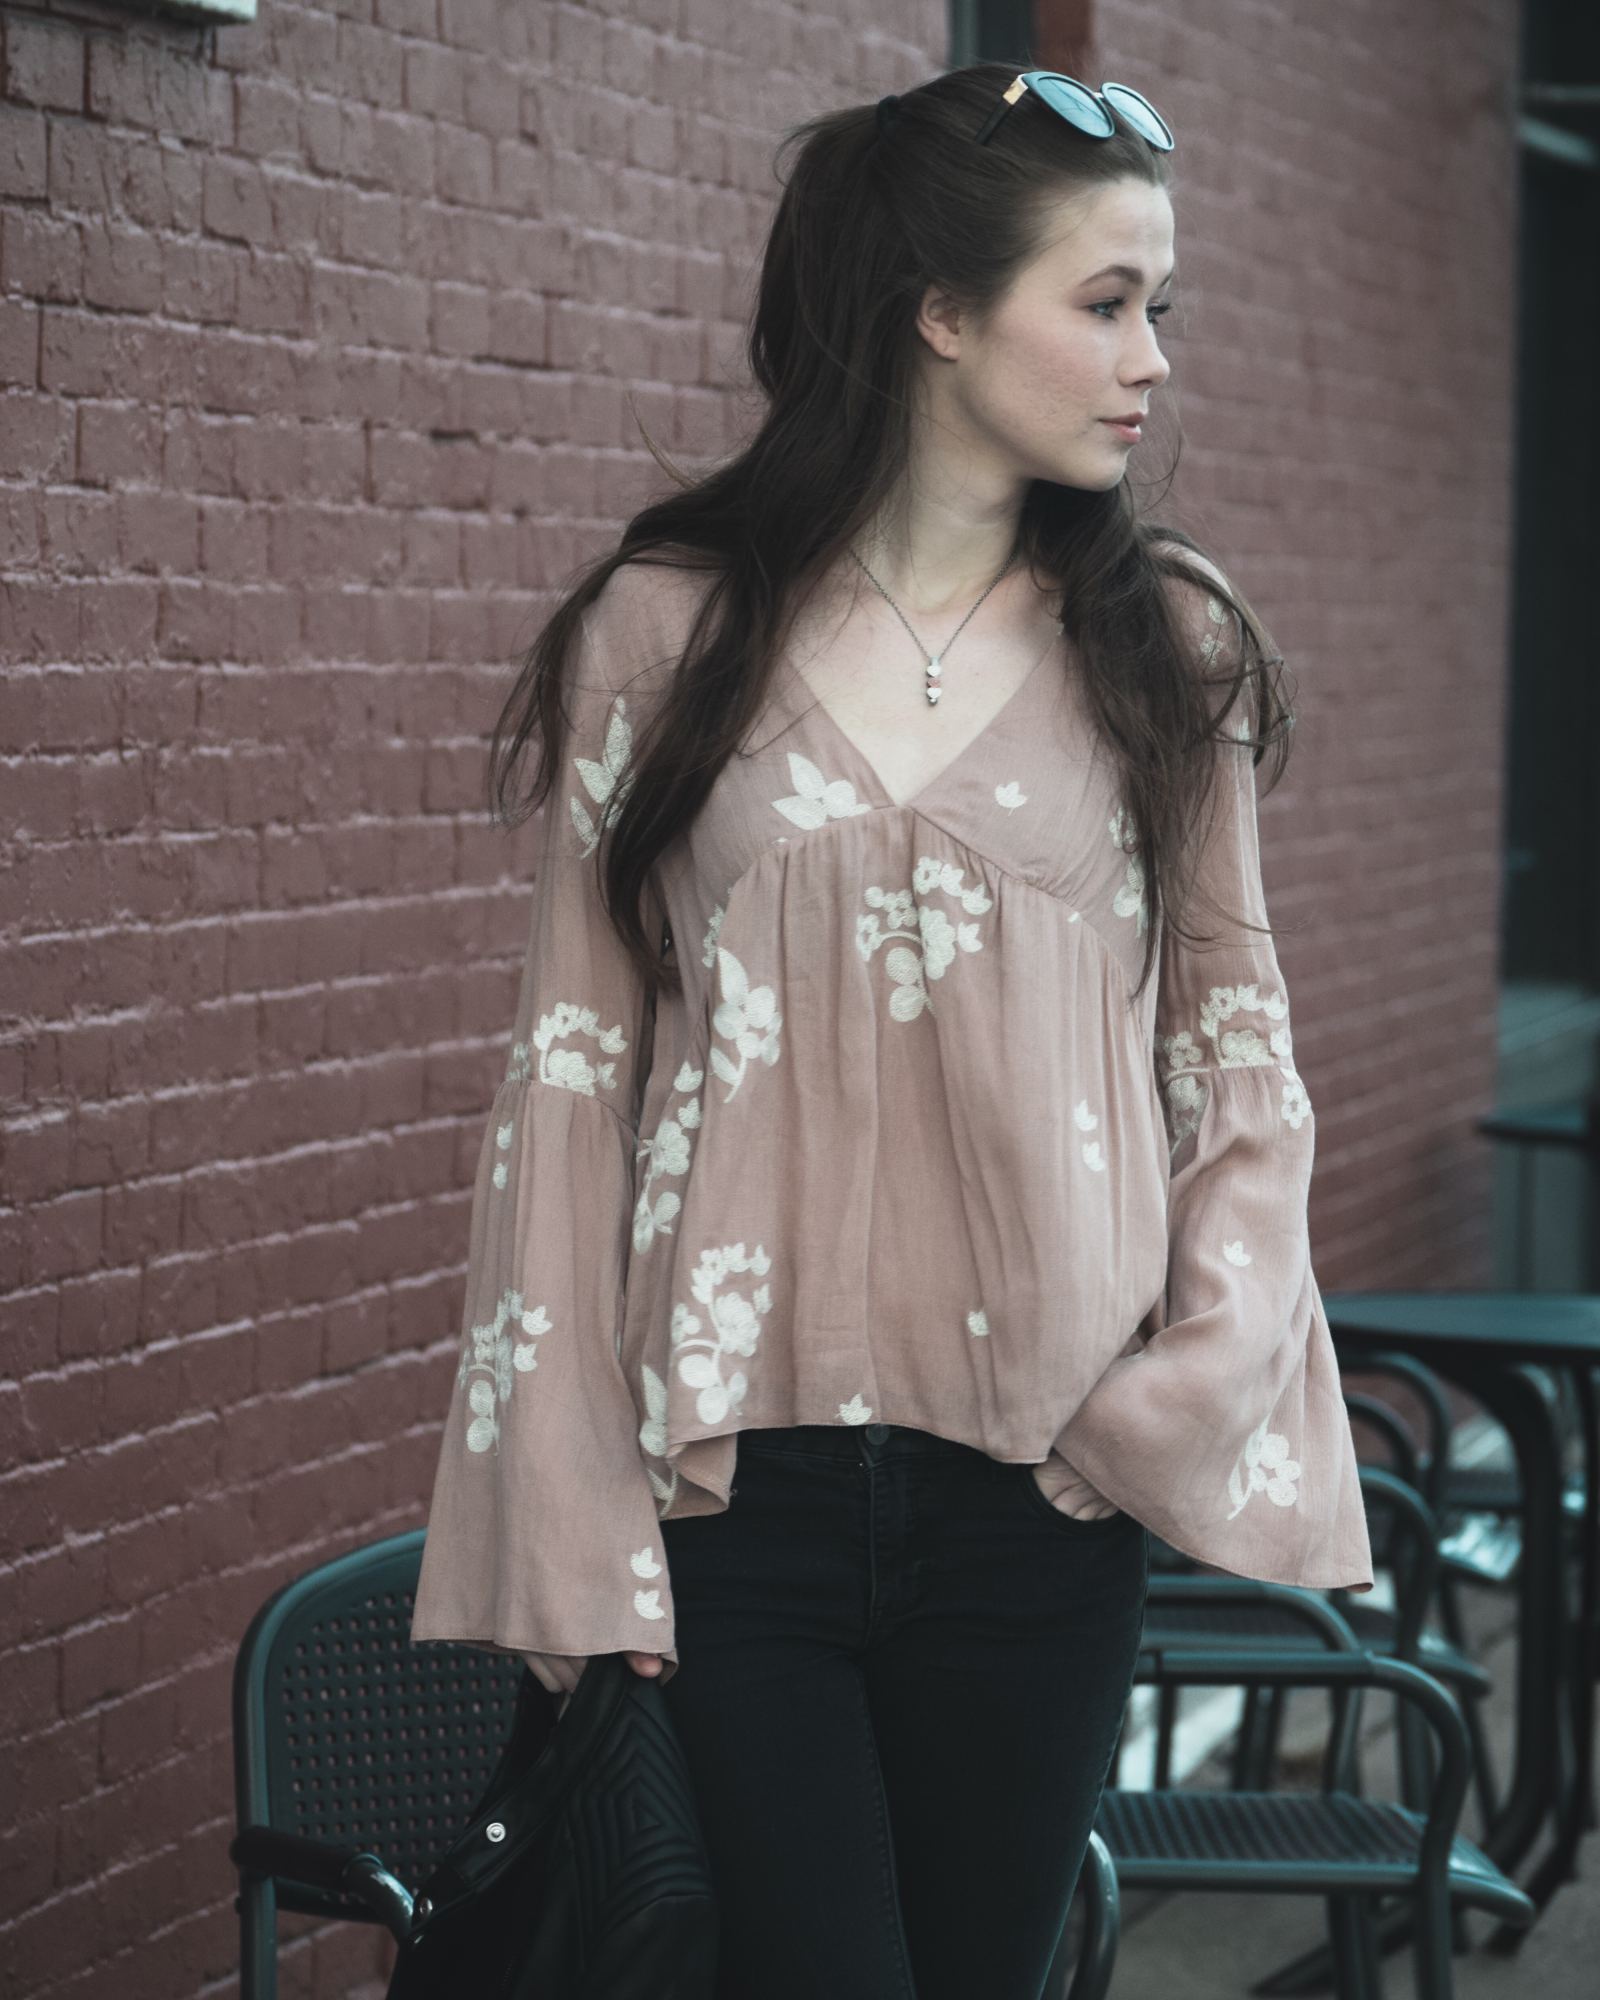 How to style a floral top